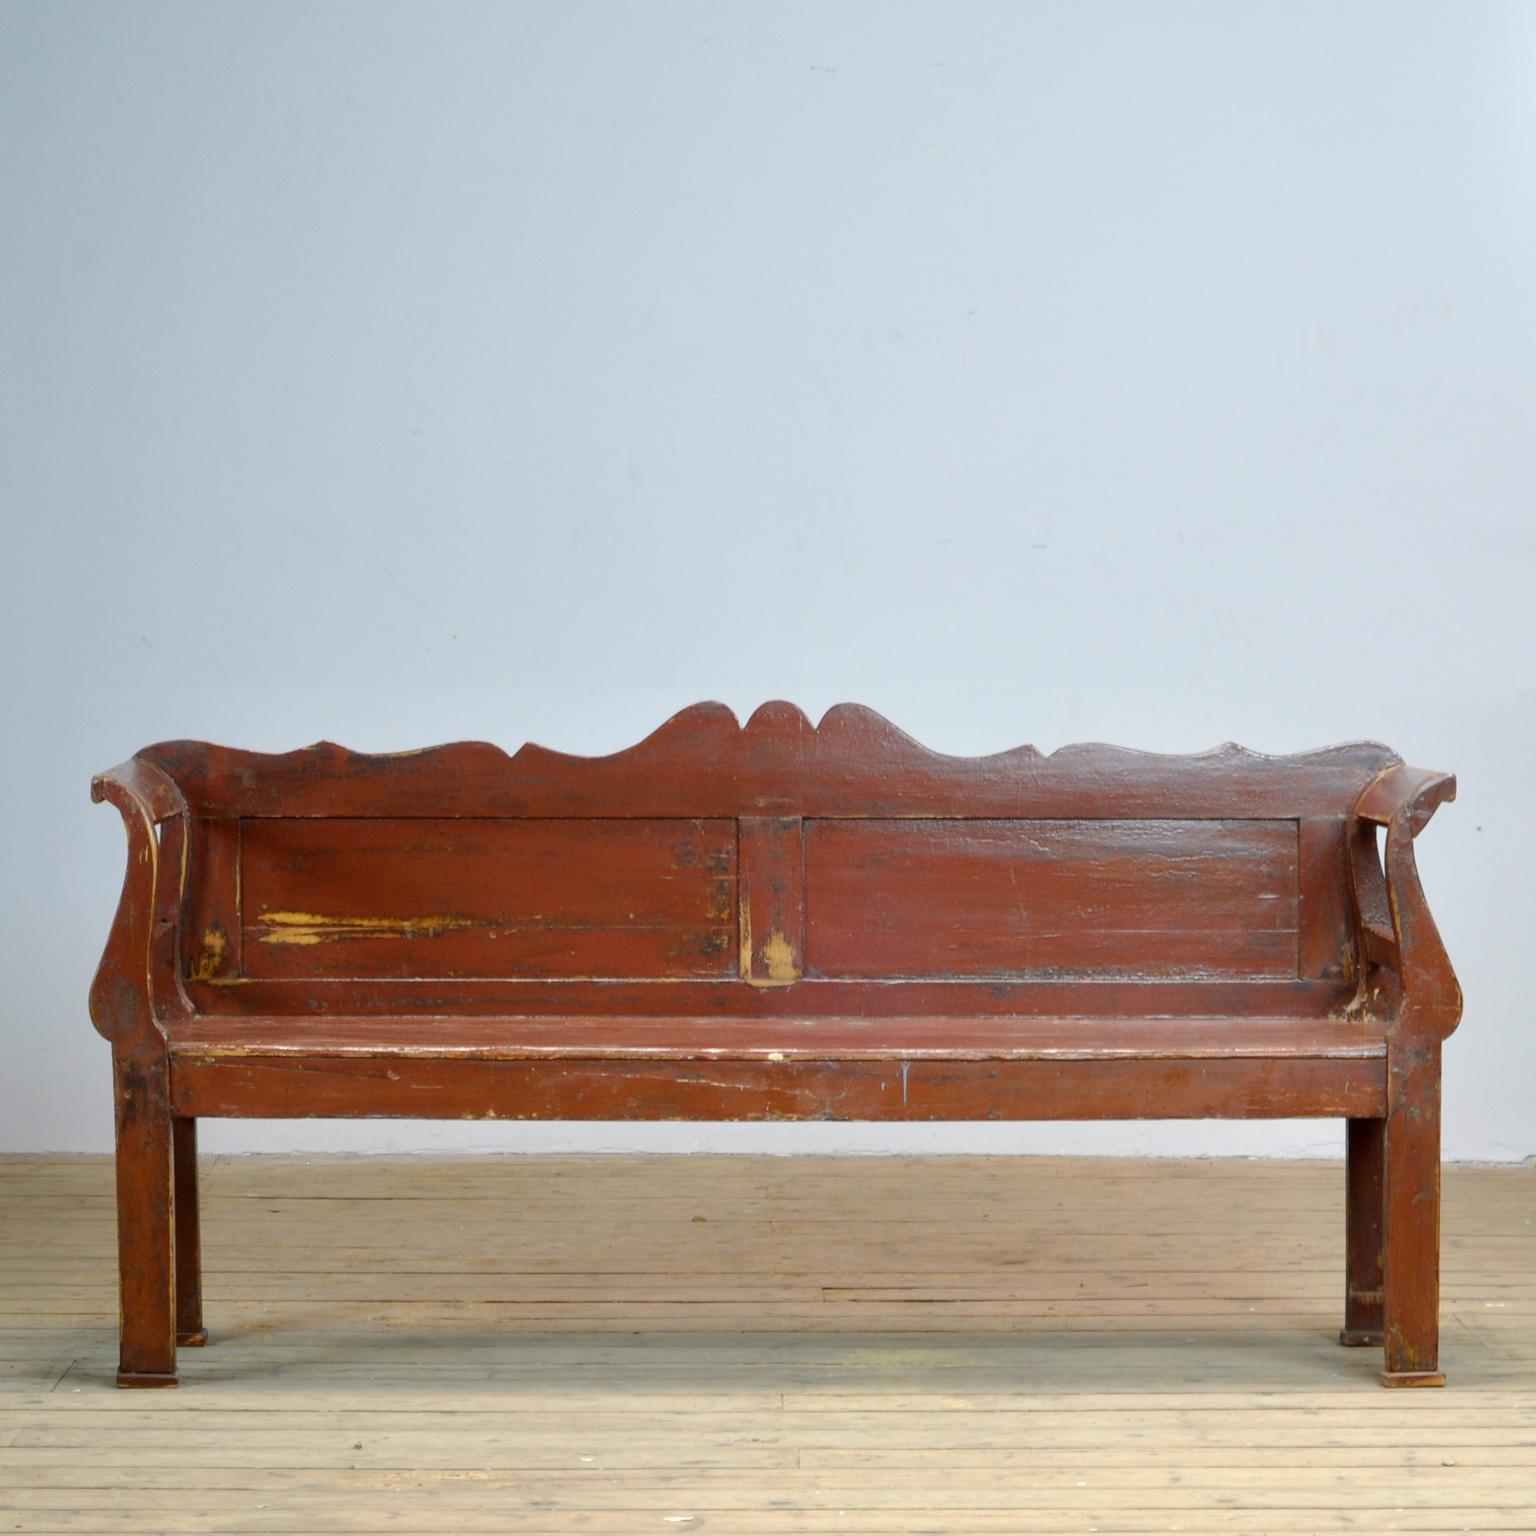 A charming bench from Hungary with the original red paint. Over time and use, the paint has been worn away to the wood in some spots. The bench is stable and sturdy.